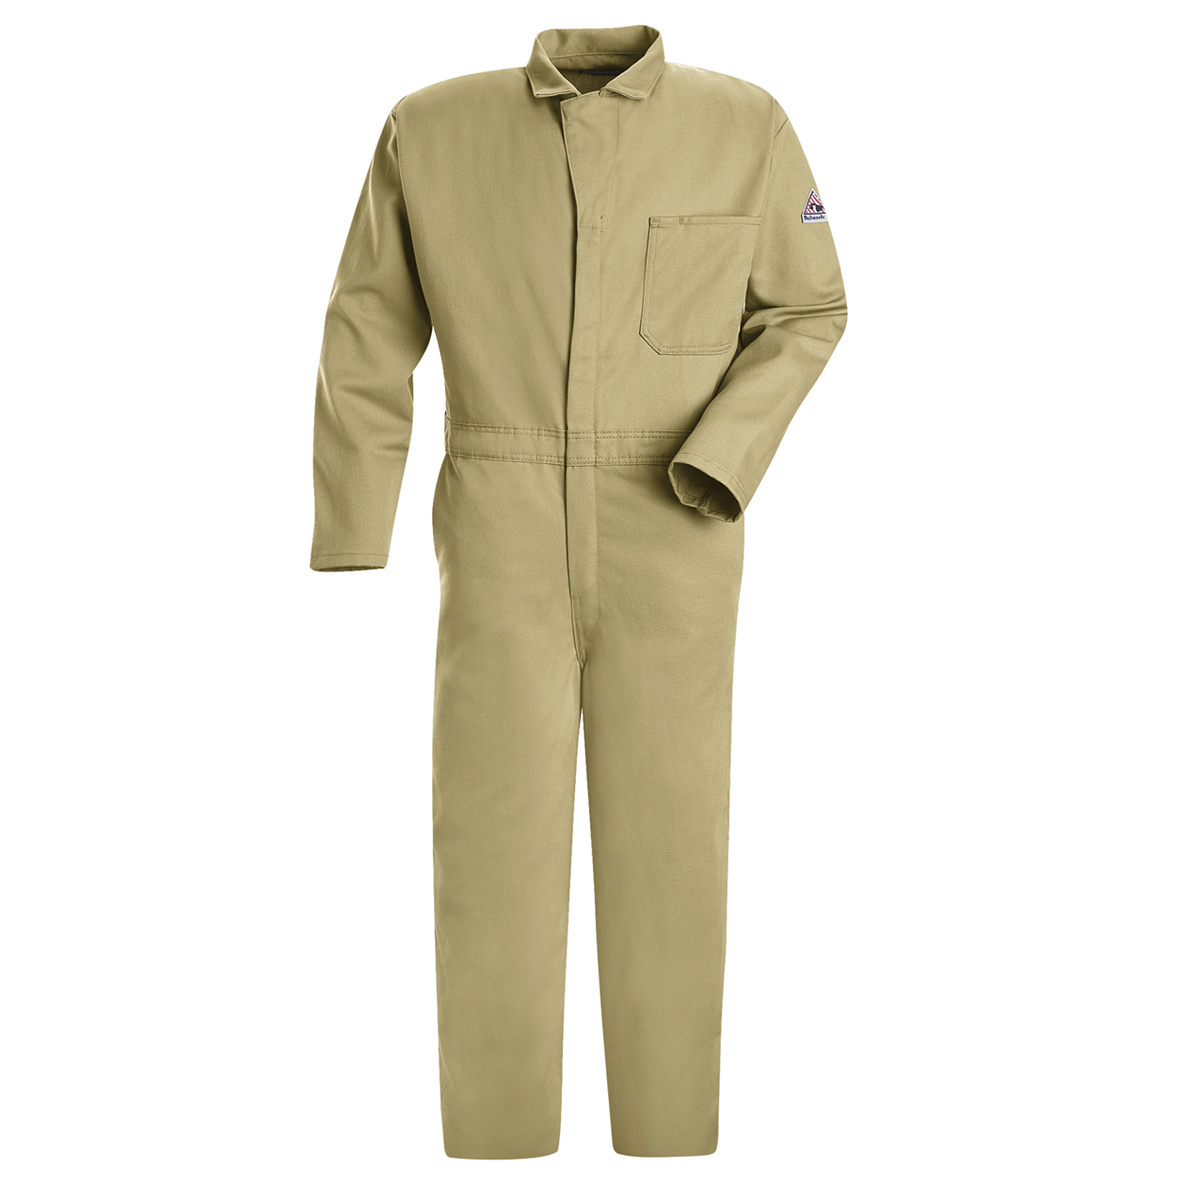 Bulwark® 42 Tall Khaki EXCEL FR® Twill Cotton Flame Resistant Coveralls With Zipper Front Closure